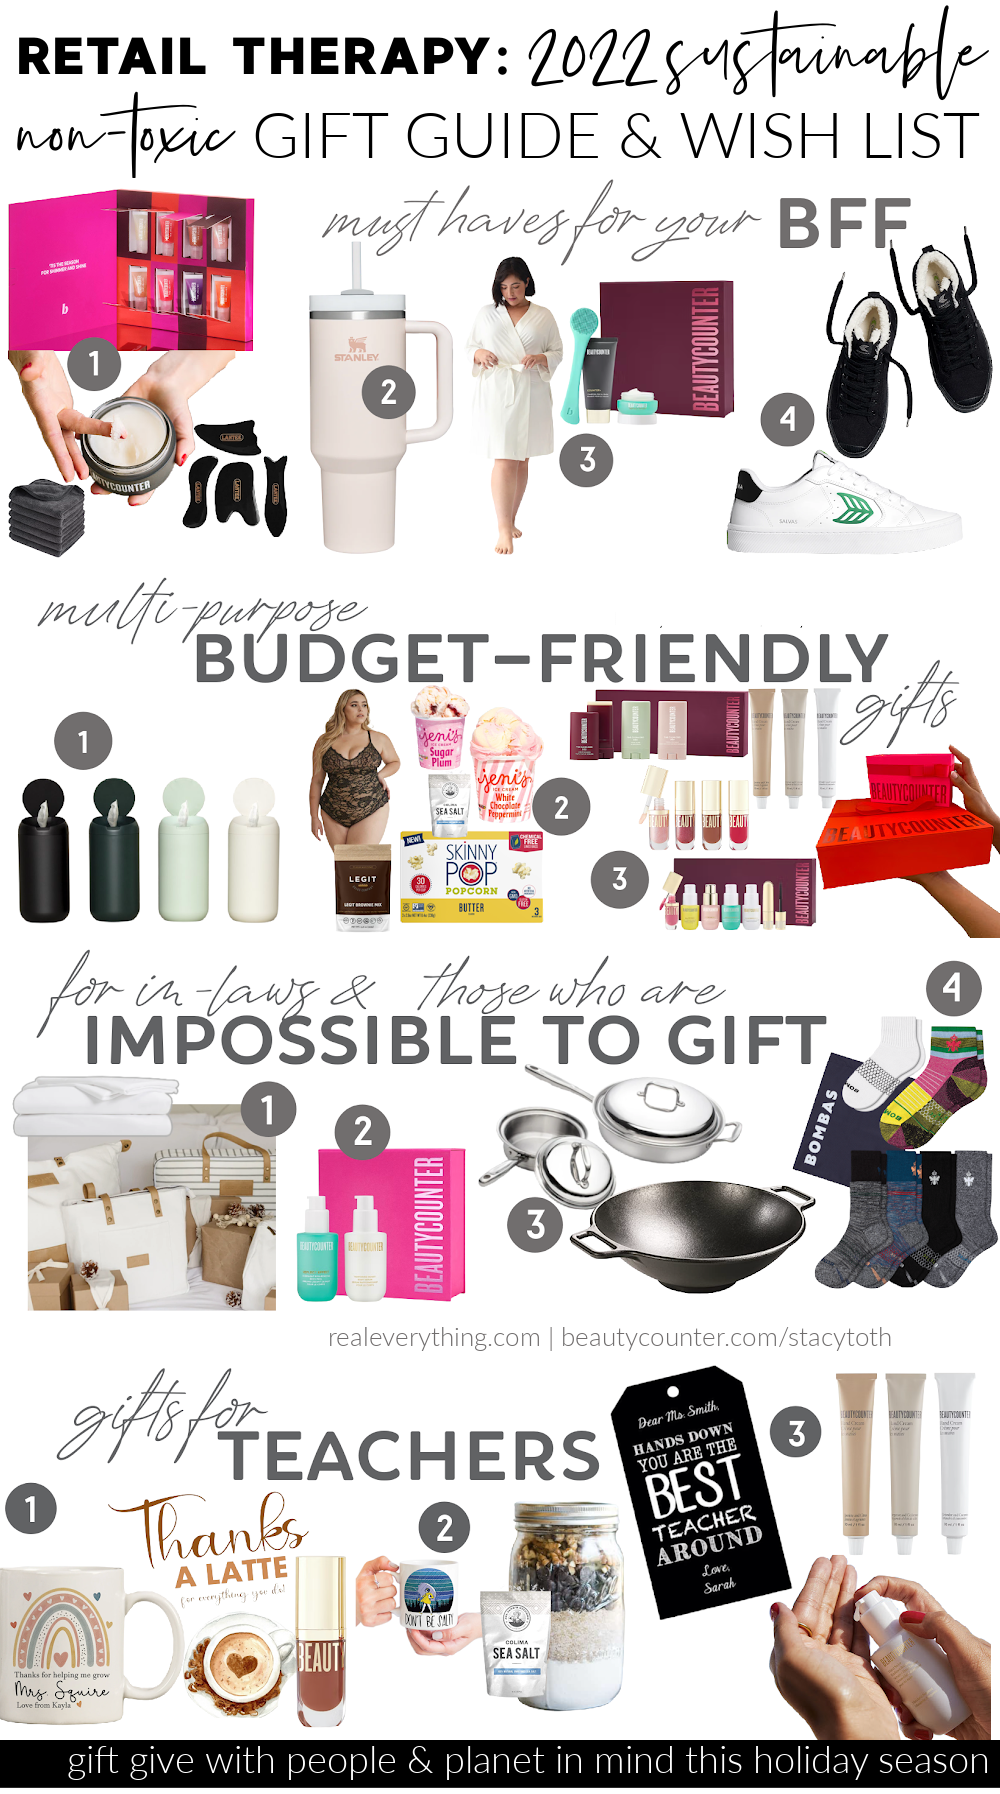 2022 Sustainable Gift Guide & Non-Toxic Wish List - Real Everything